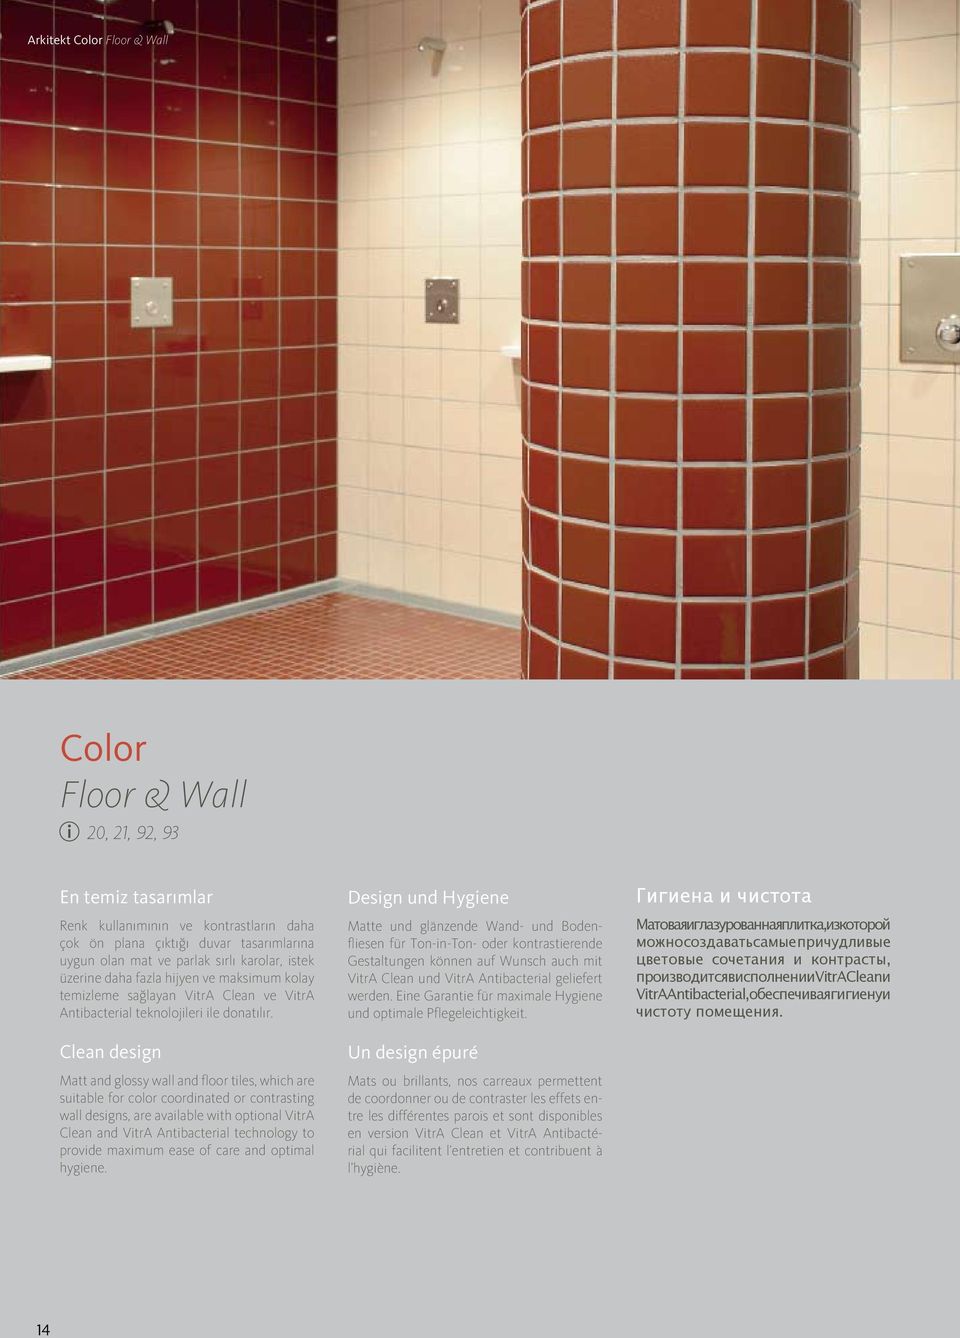 Clean design and glossy wall and floor tiles, which are suitable for color coordinated or contrasting wall designs, are available with optional VitrA Clean and VitrA Antibacterial technology to